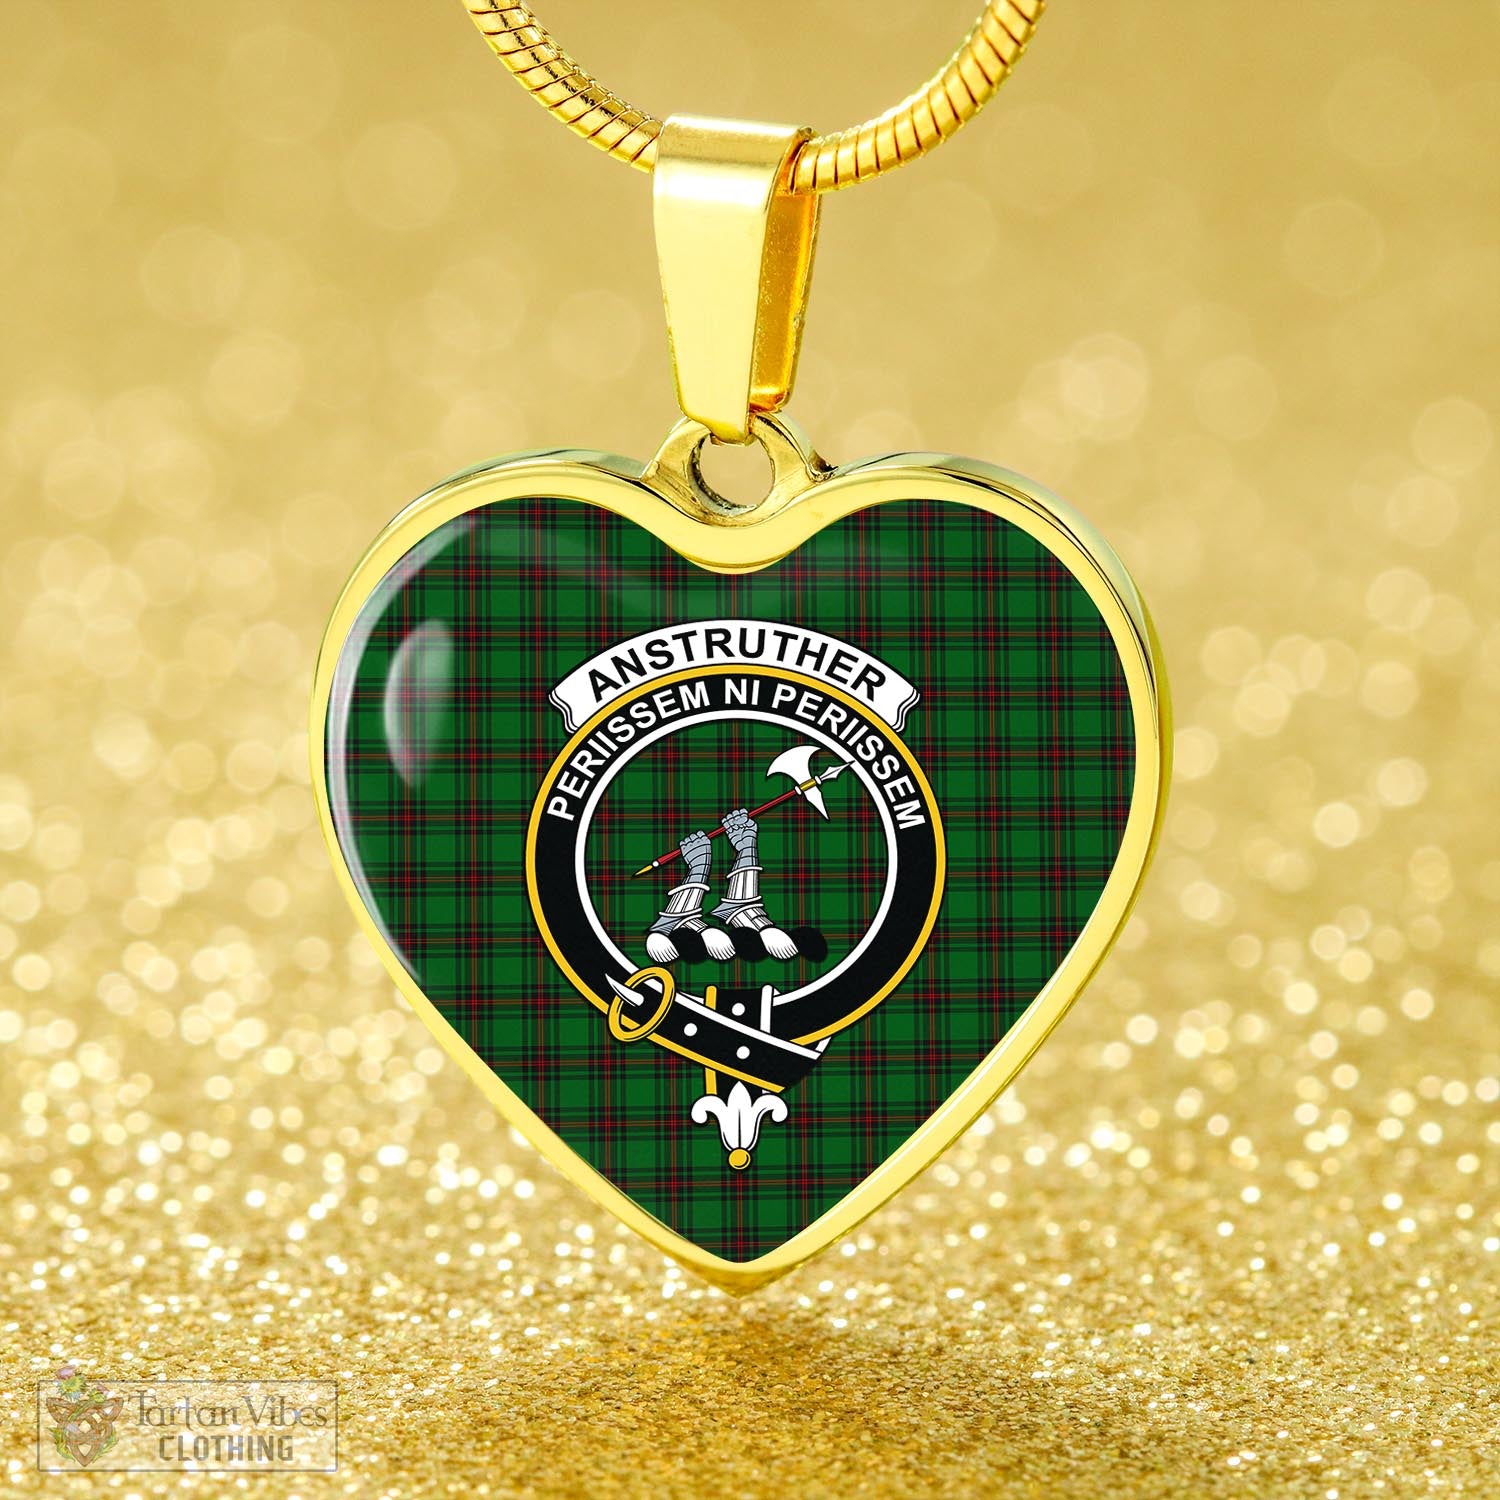 Tartan Vibes Clothing Anstruther Tartan Heart Necklace with Family Crest